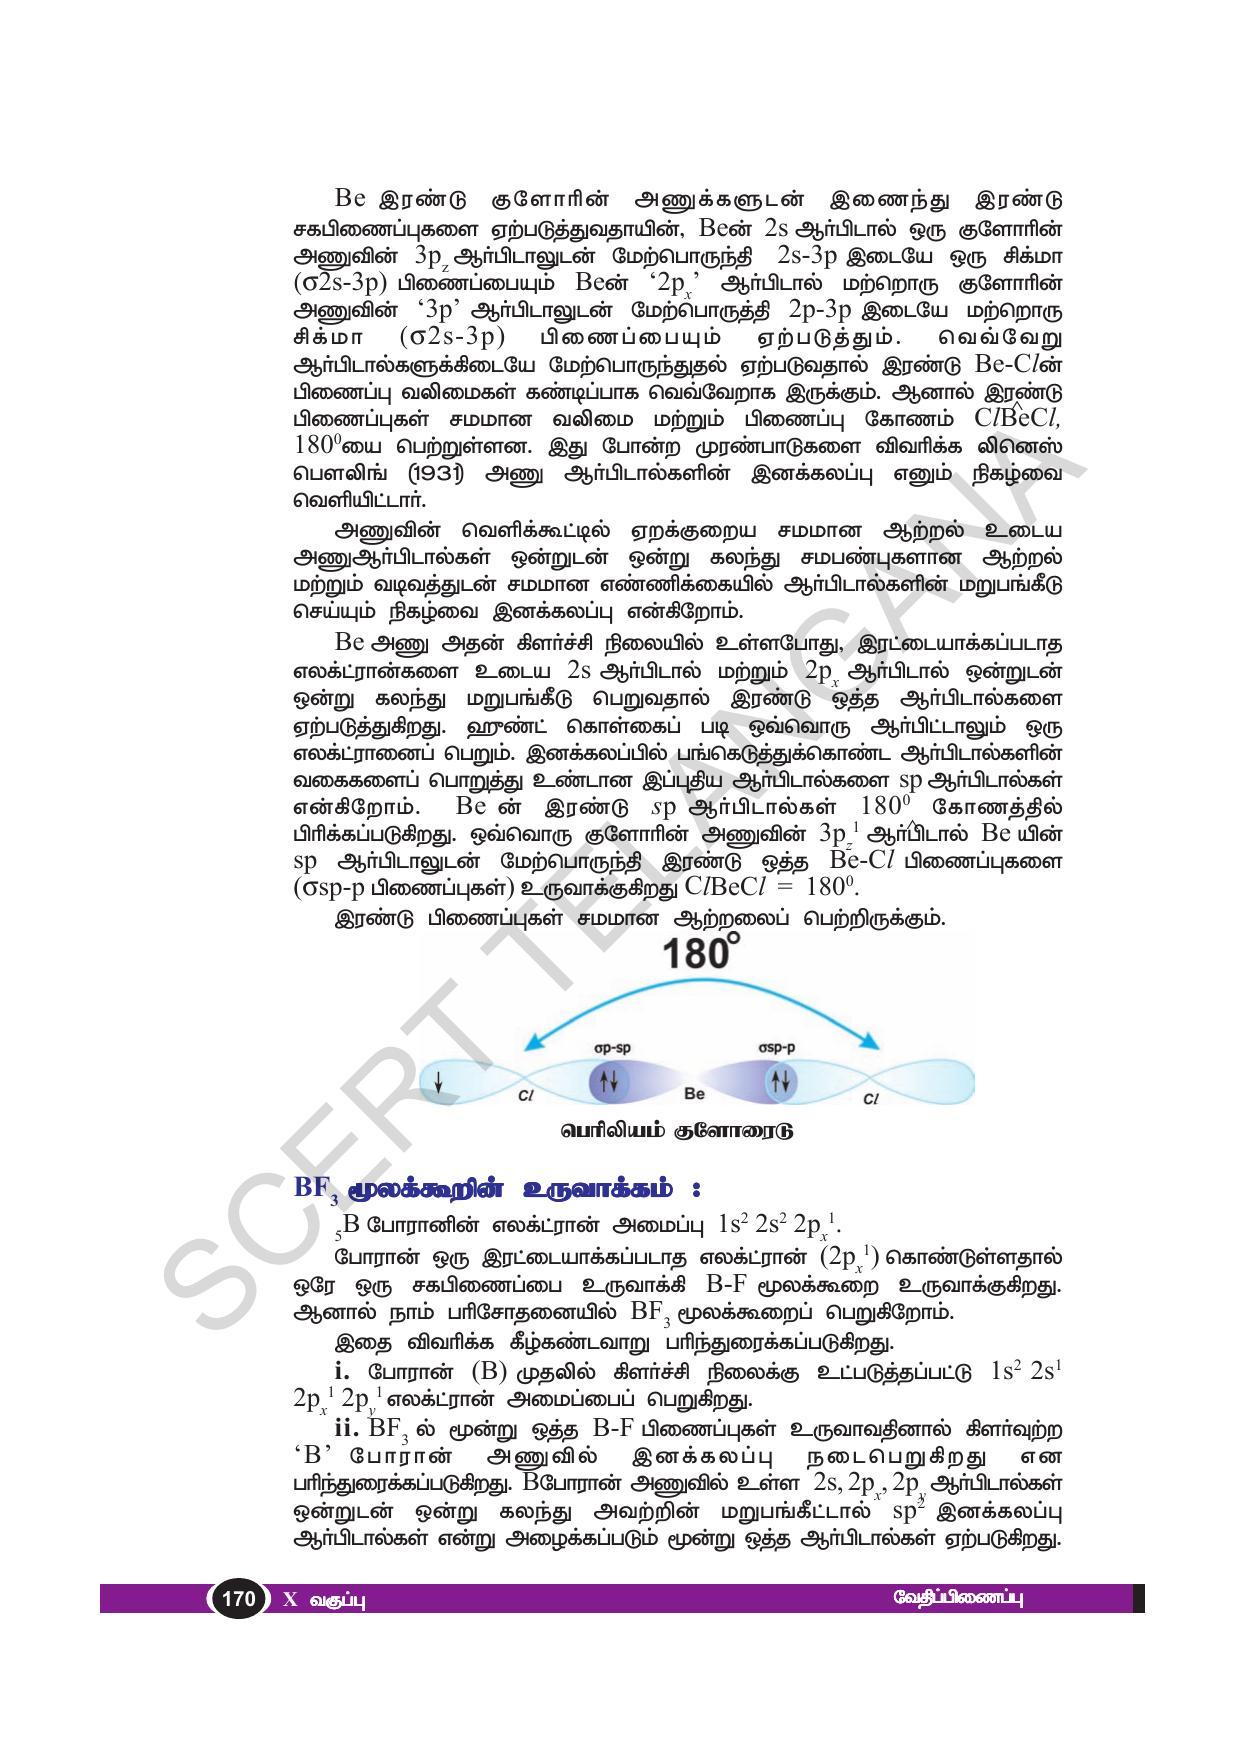 TS SCERT Class 10 Physical Science(Tamil Medium) Text Book - Page 182